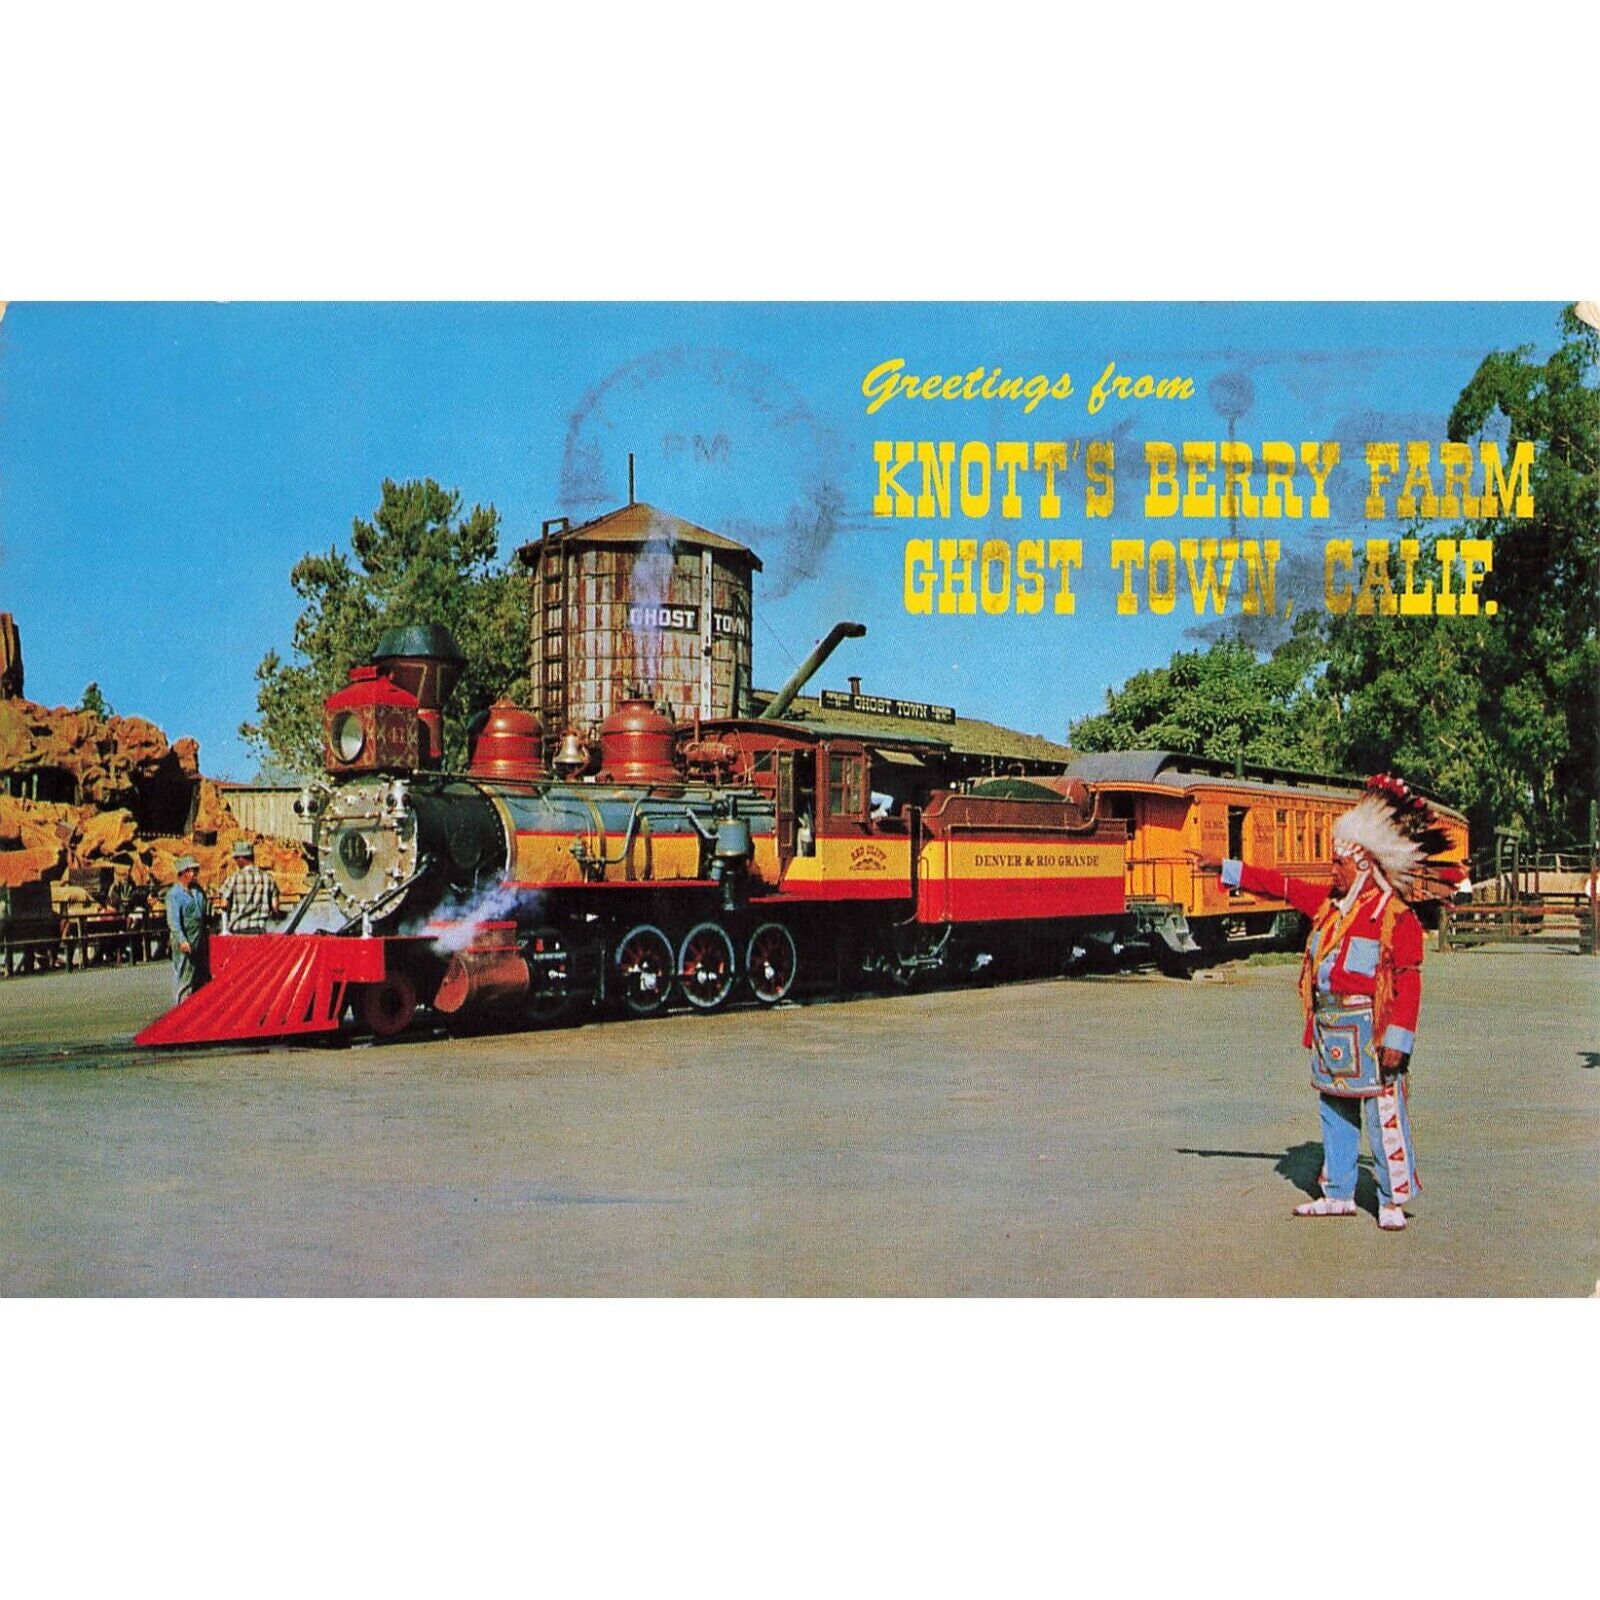 Postcard Greetings from Knott's Berry Farm, Ghost Town, Calif. Vintage Chrome Po